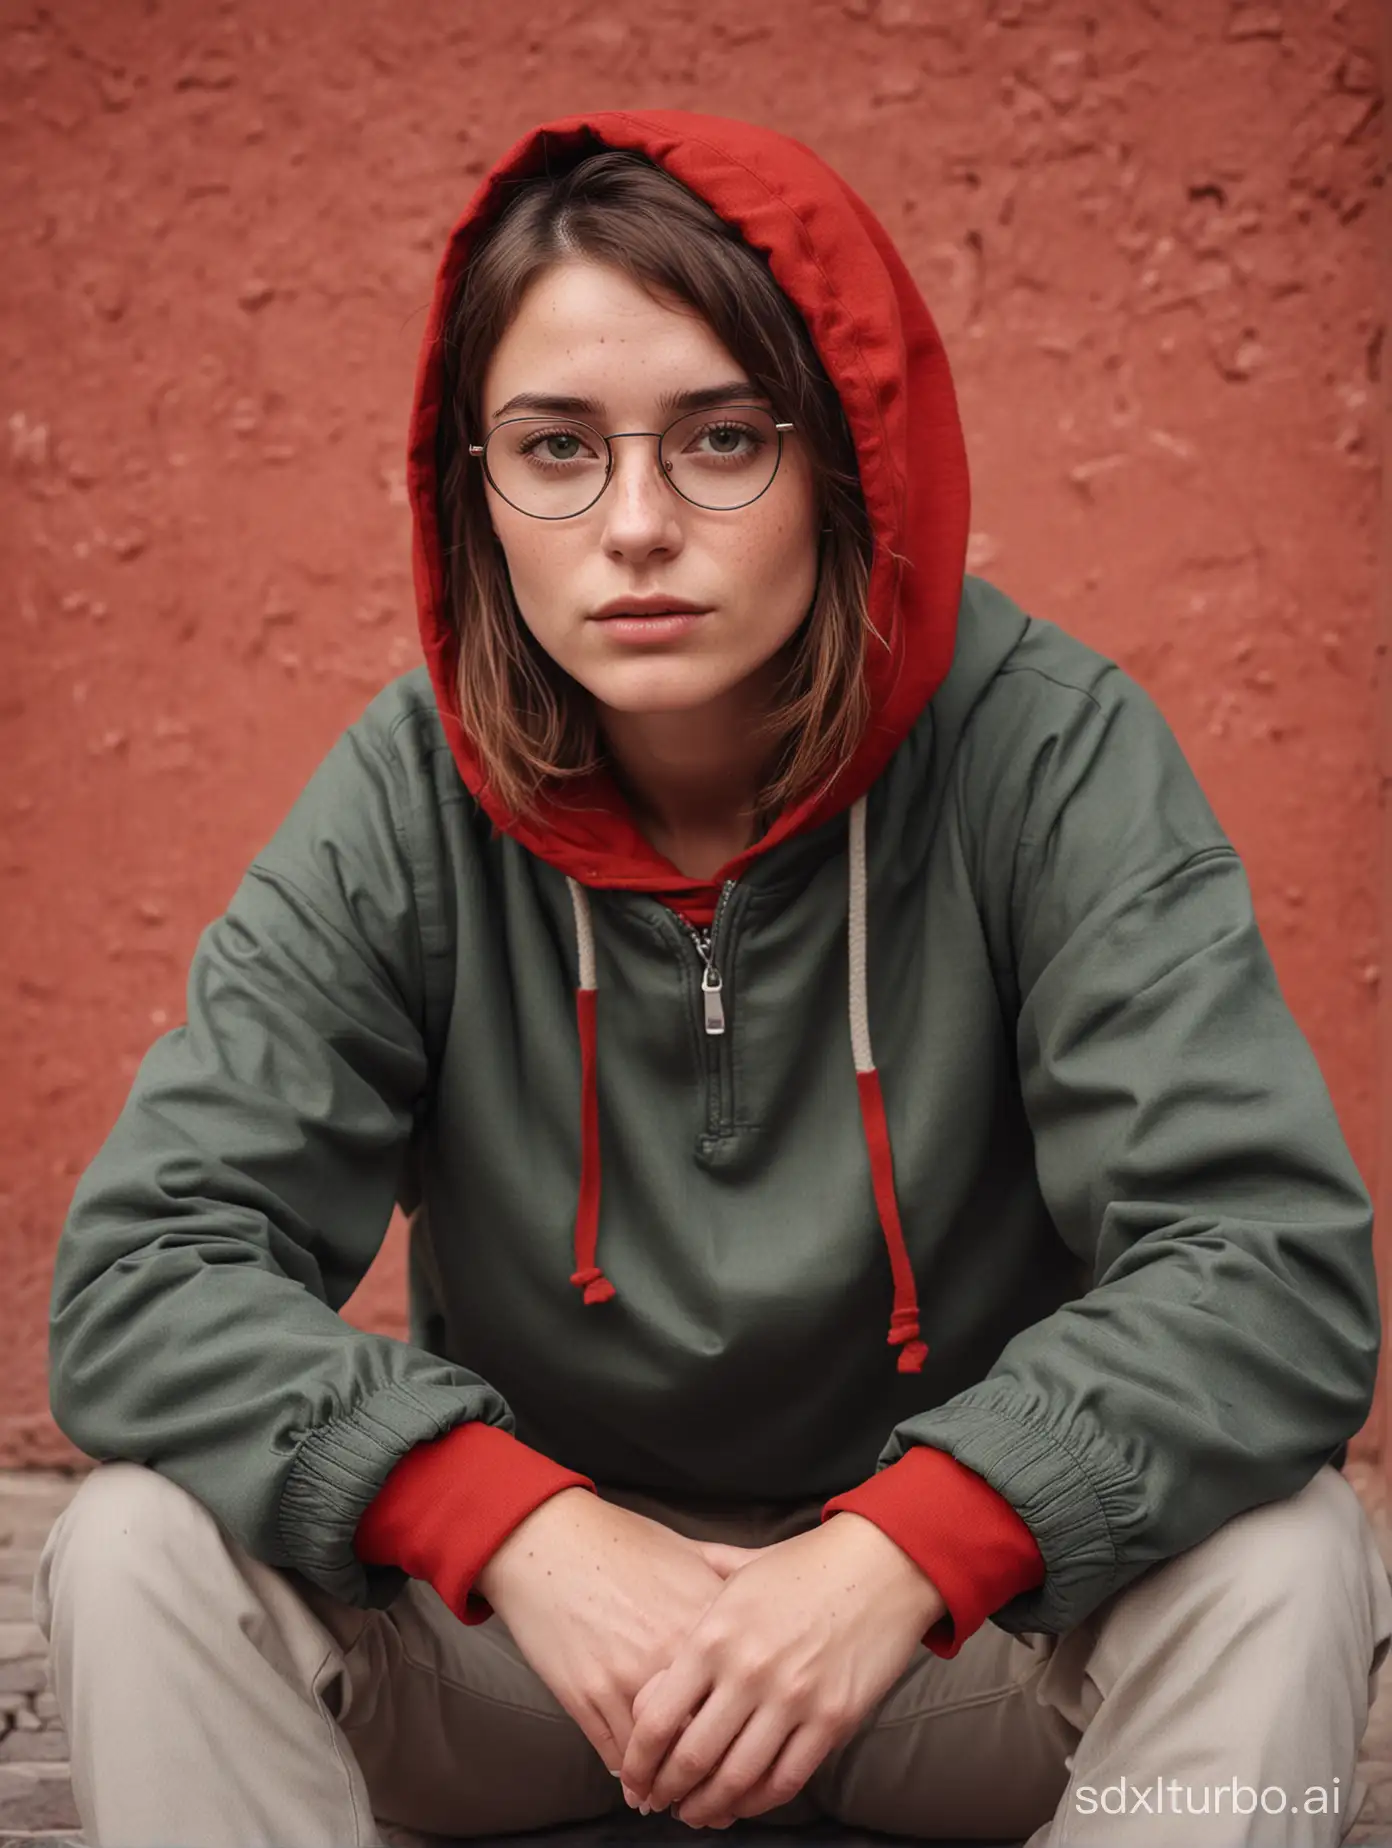 French-Woman-with-Freckles-and-Aviator-Glasses-Sitting-in-Model-Pose-Against-Red-Wall